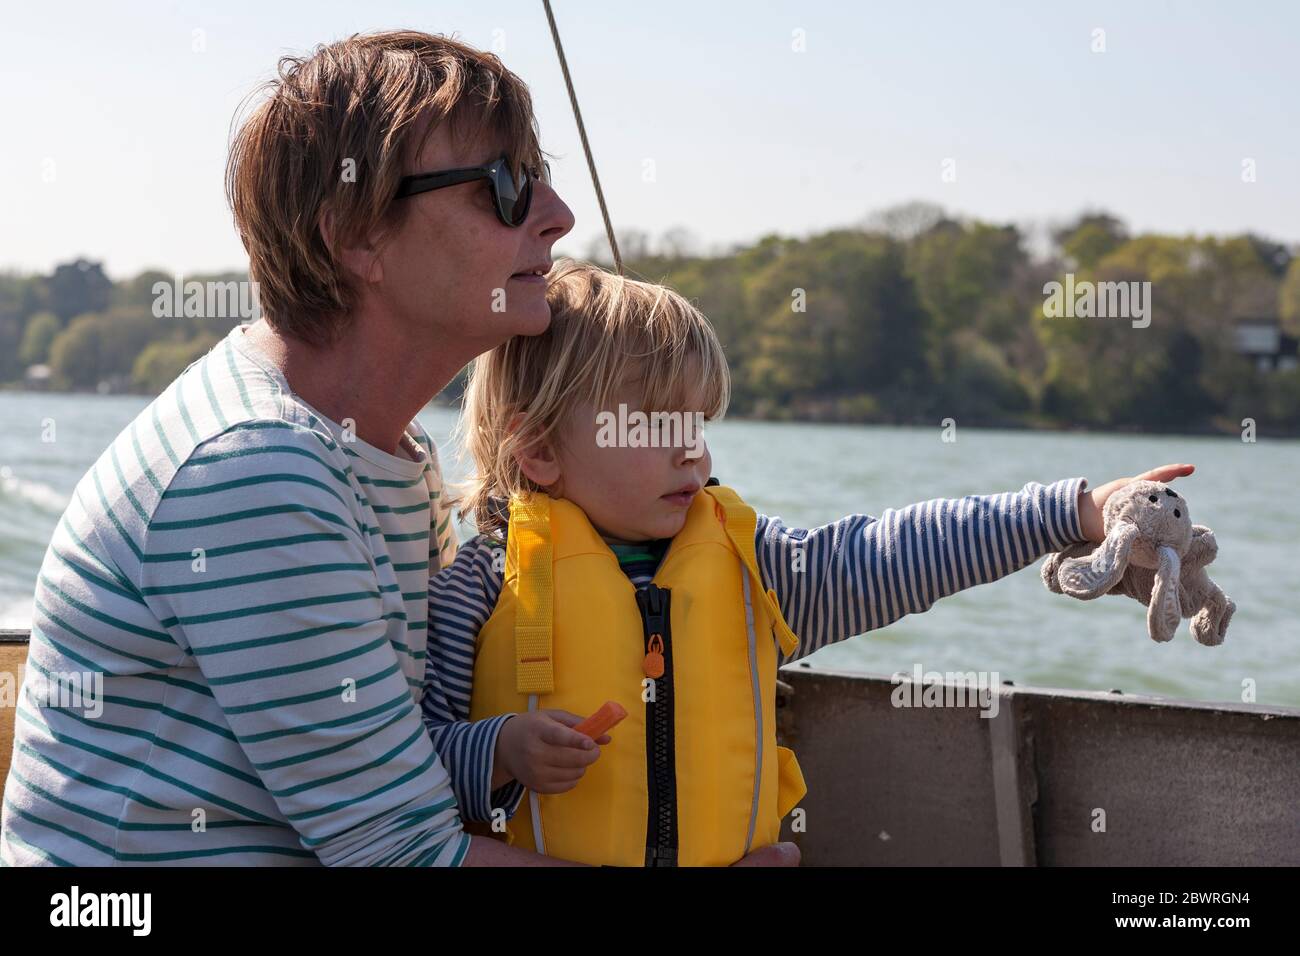 Two year old boy pointing excitedly whilst out on a boat with his grandmother, Isle of Wight, England, UK.  MODEL RELEASED Stock Photo